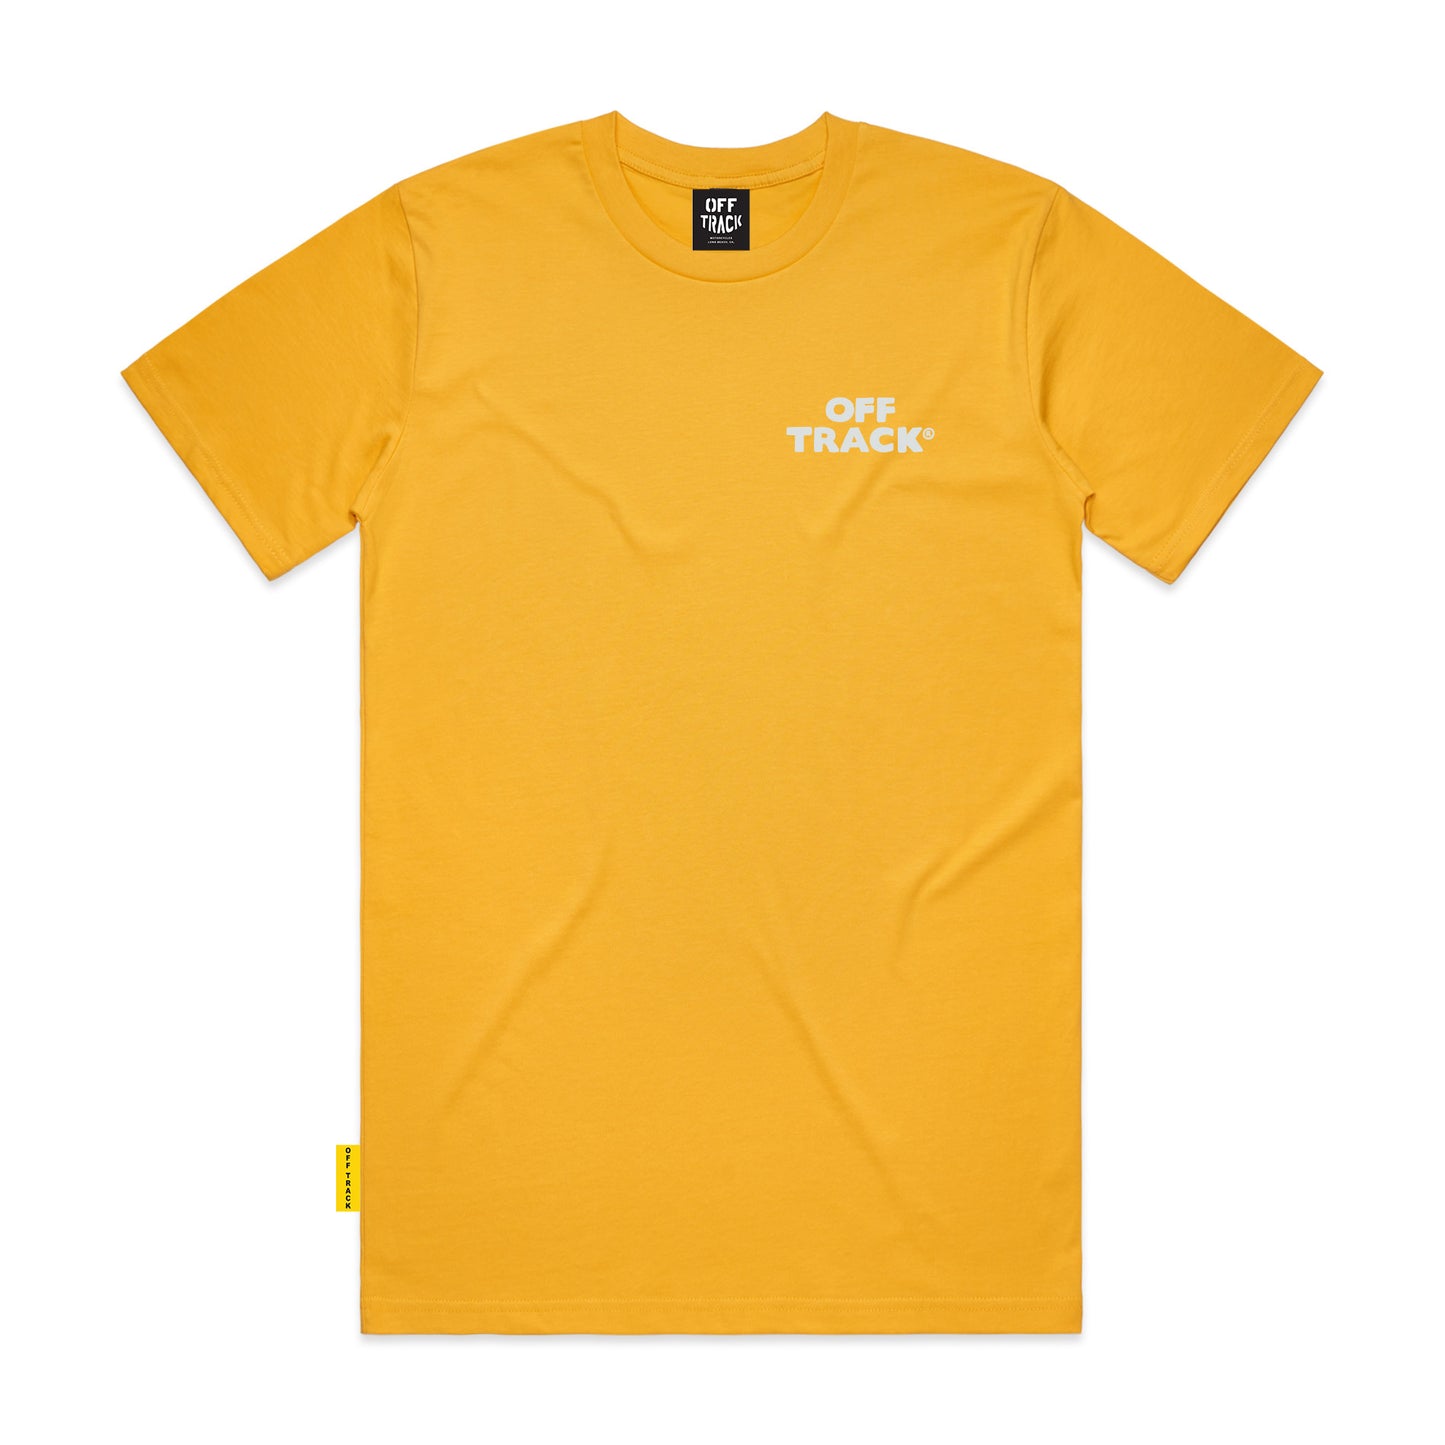 OFF TRACK DOUBLE UP CLASSIC TEE - Various Colors